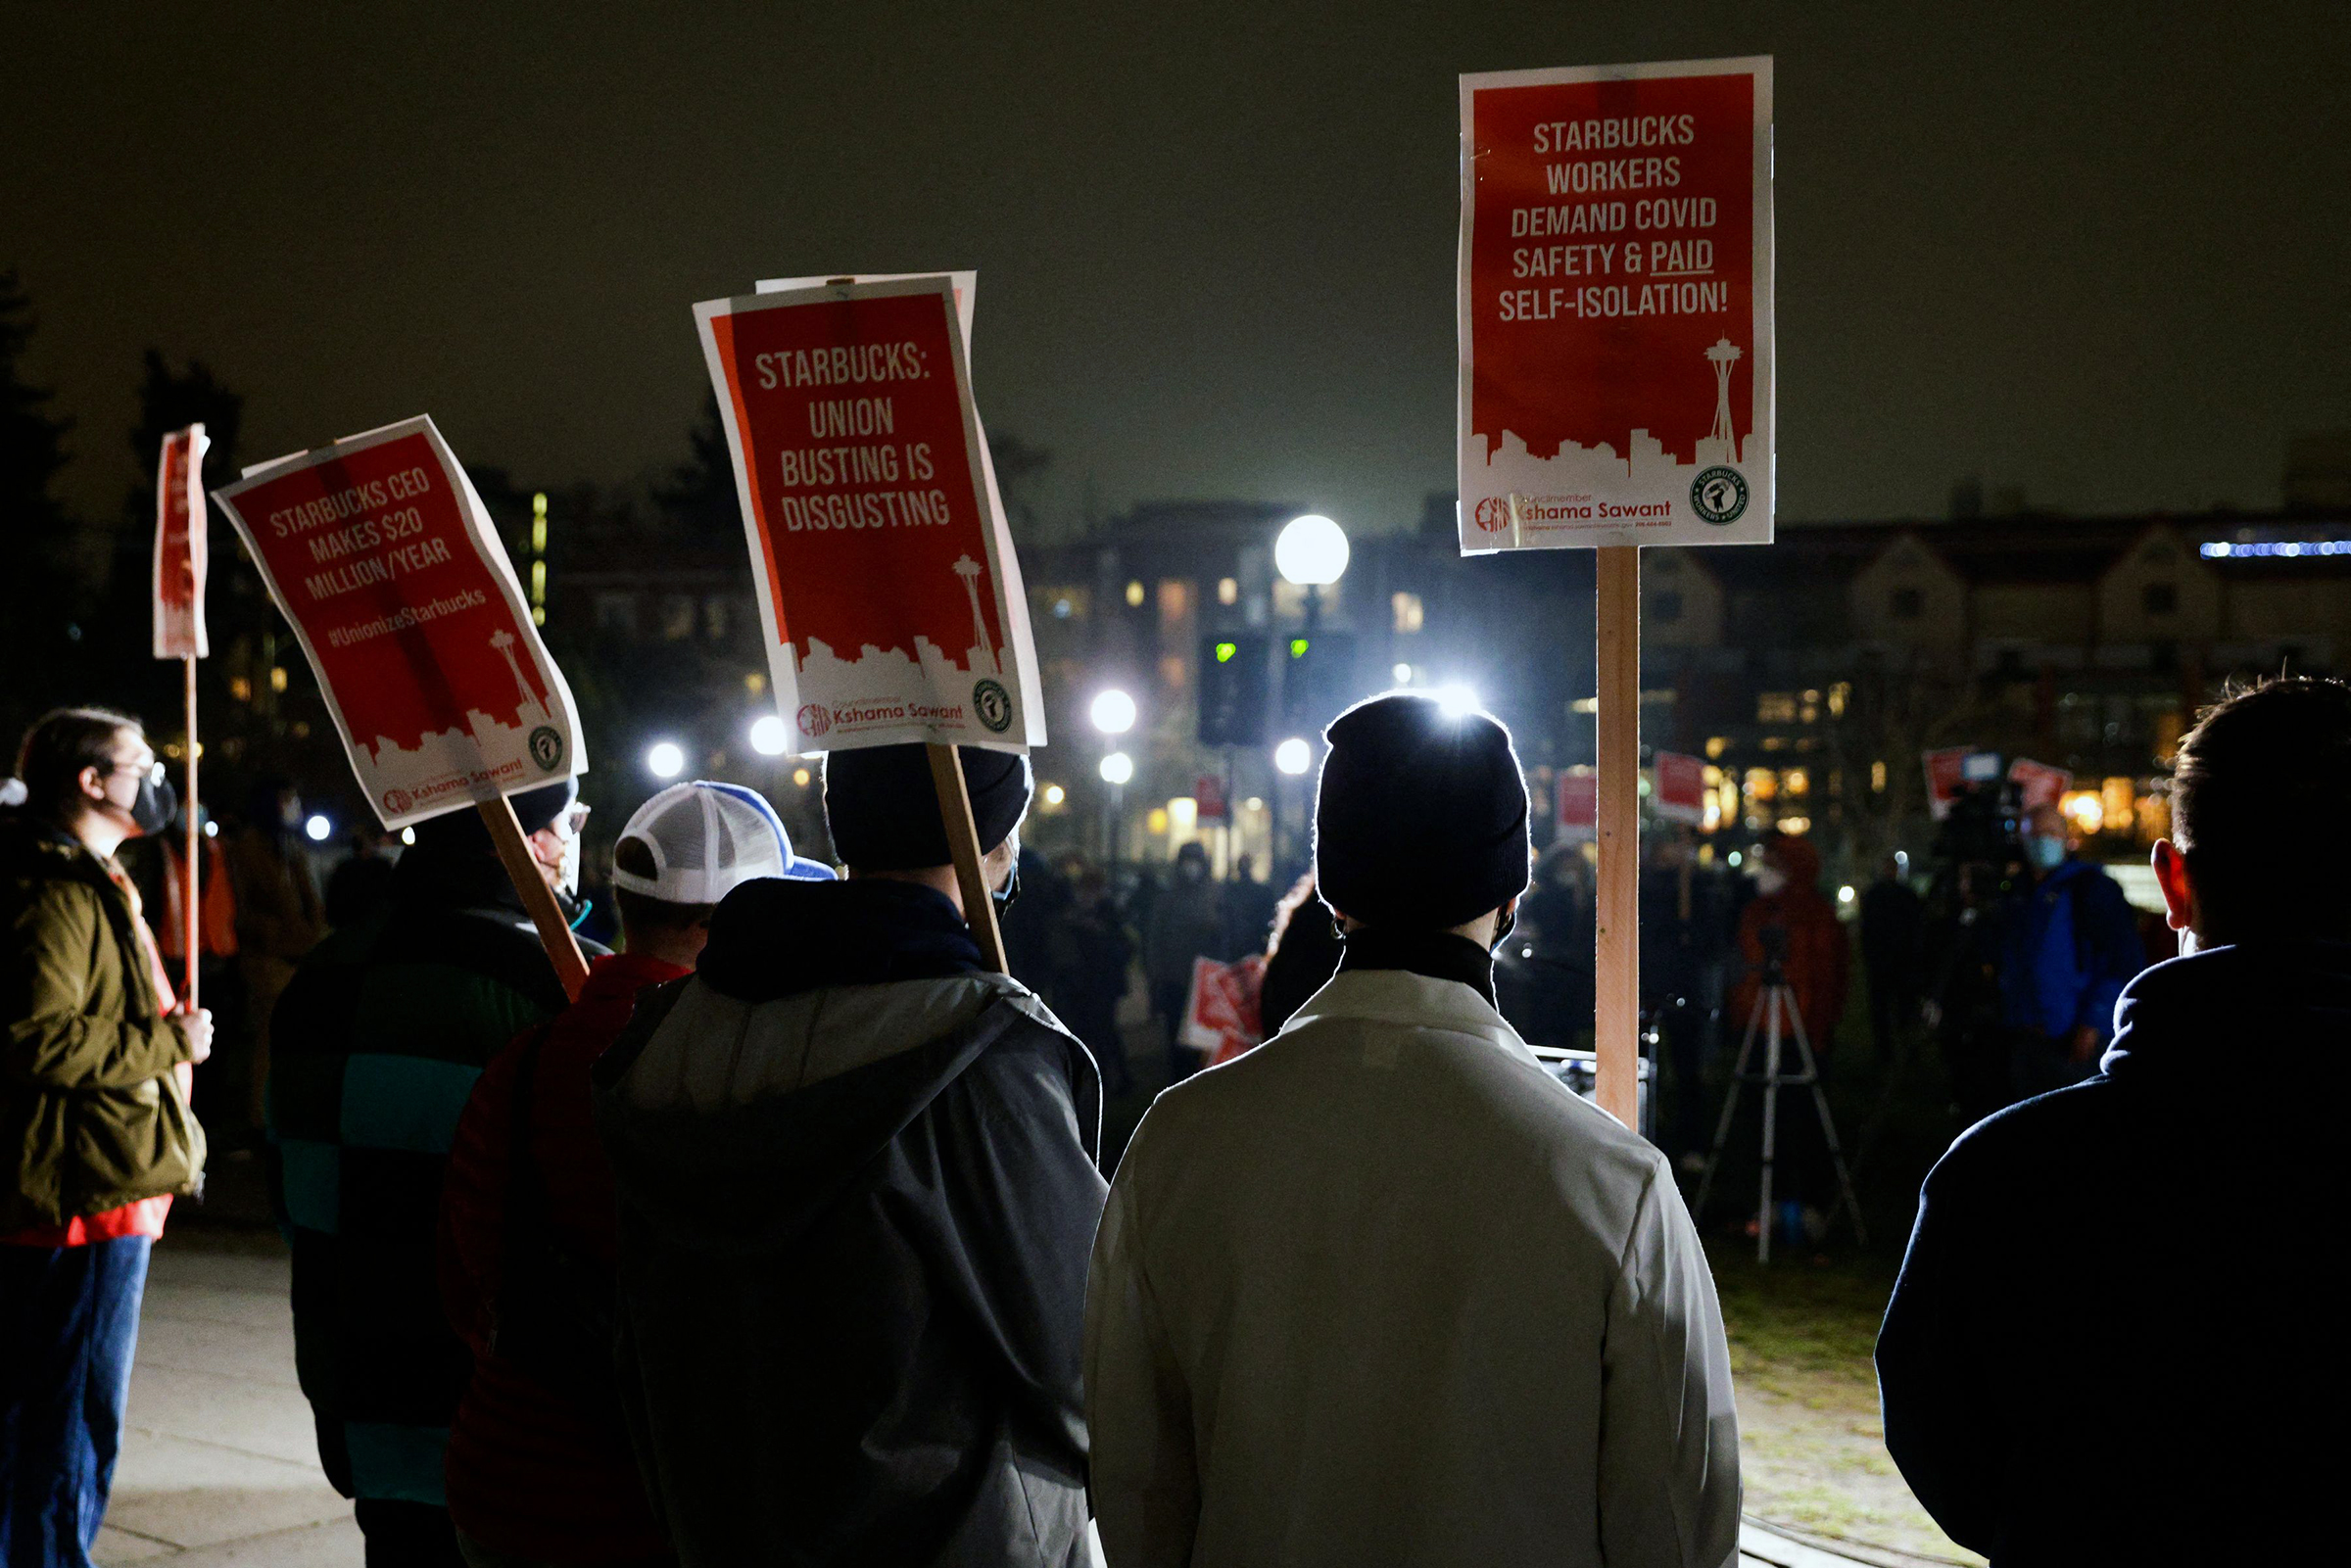 Representatives from local unions hold signs in support of workers of two Seattle Starbucks locations that announced plans to unionize, during an evening rally at Cal Anderson Park in Seattle, Washington, January 25, 2022. (Jason Redmond—AFP/Getty Images)